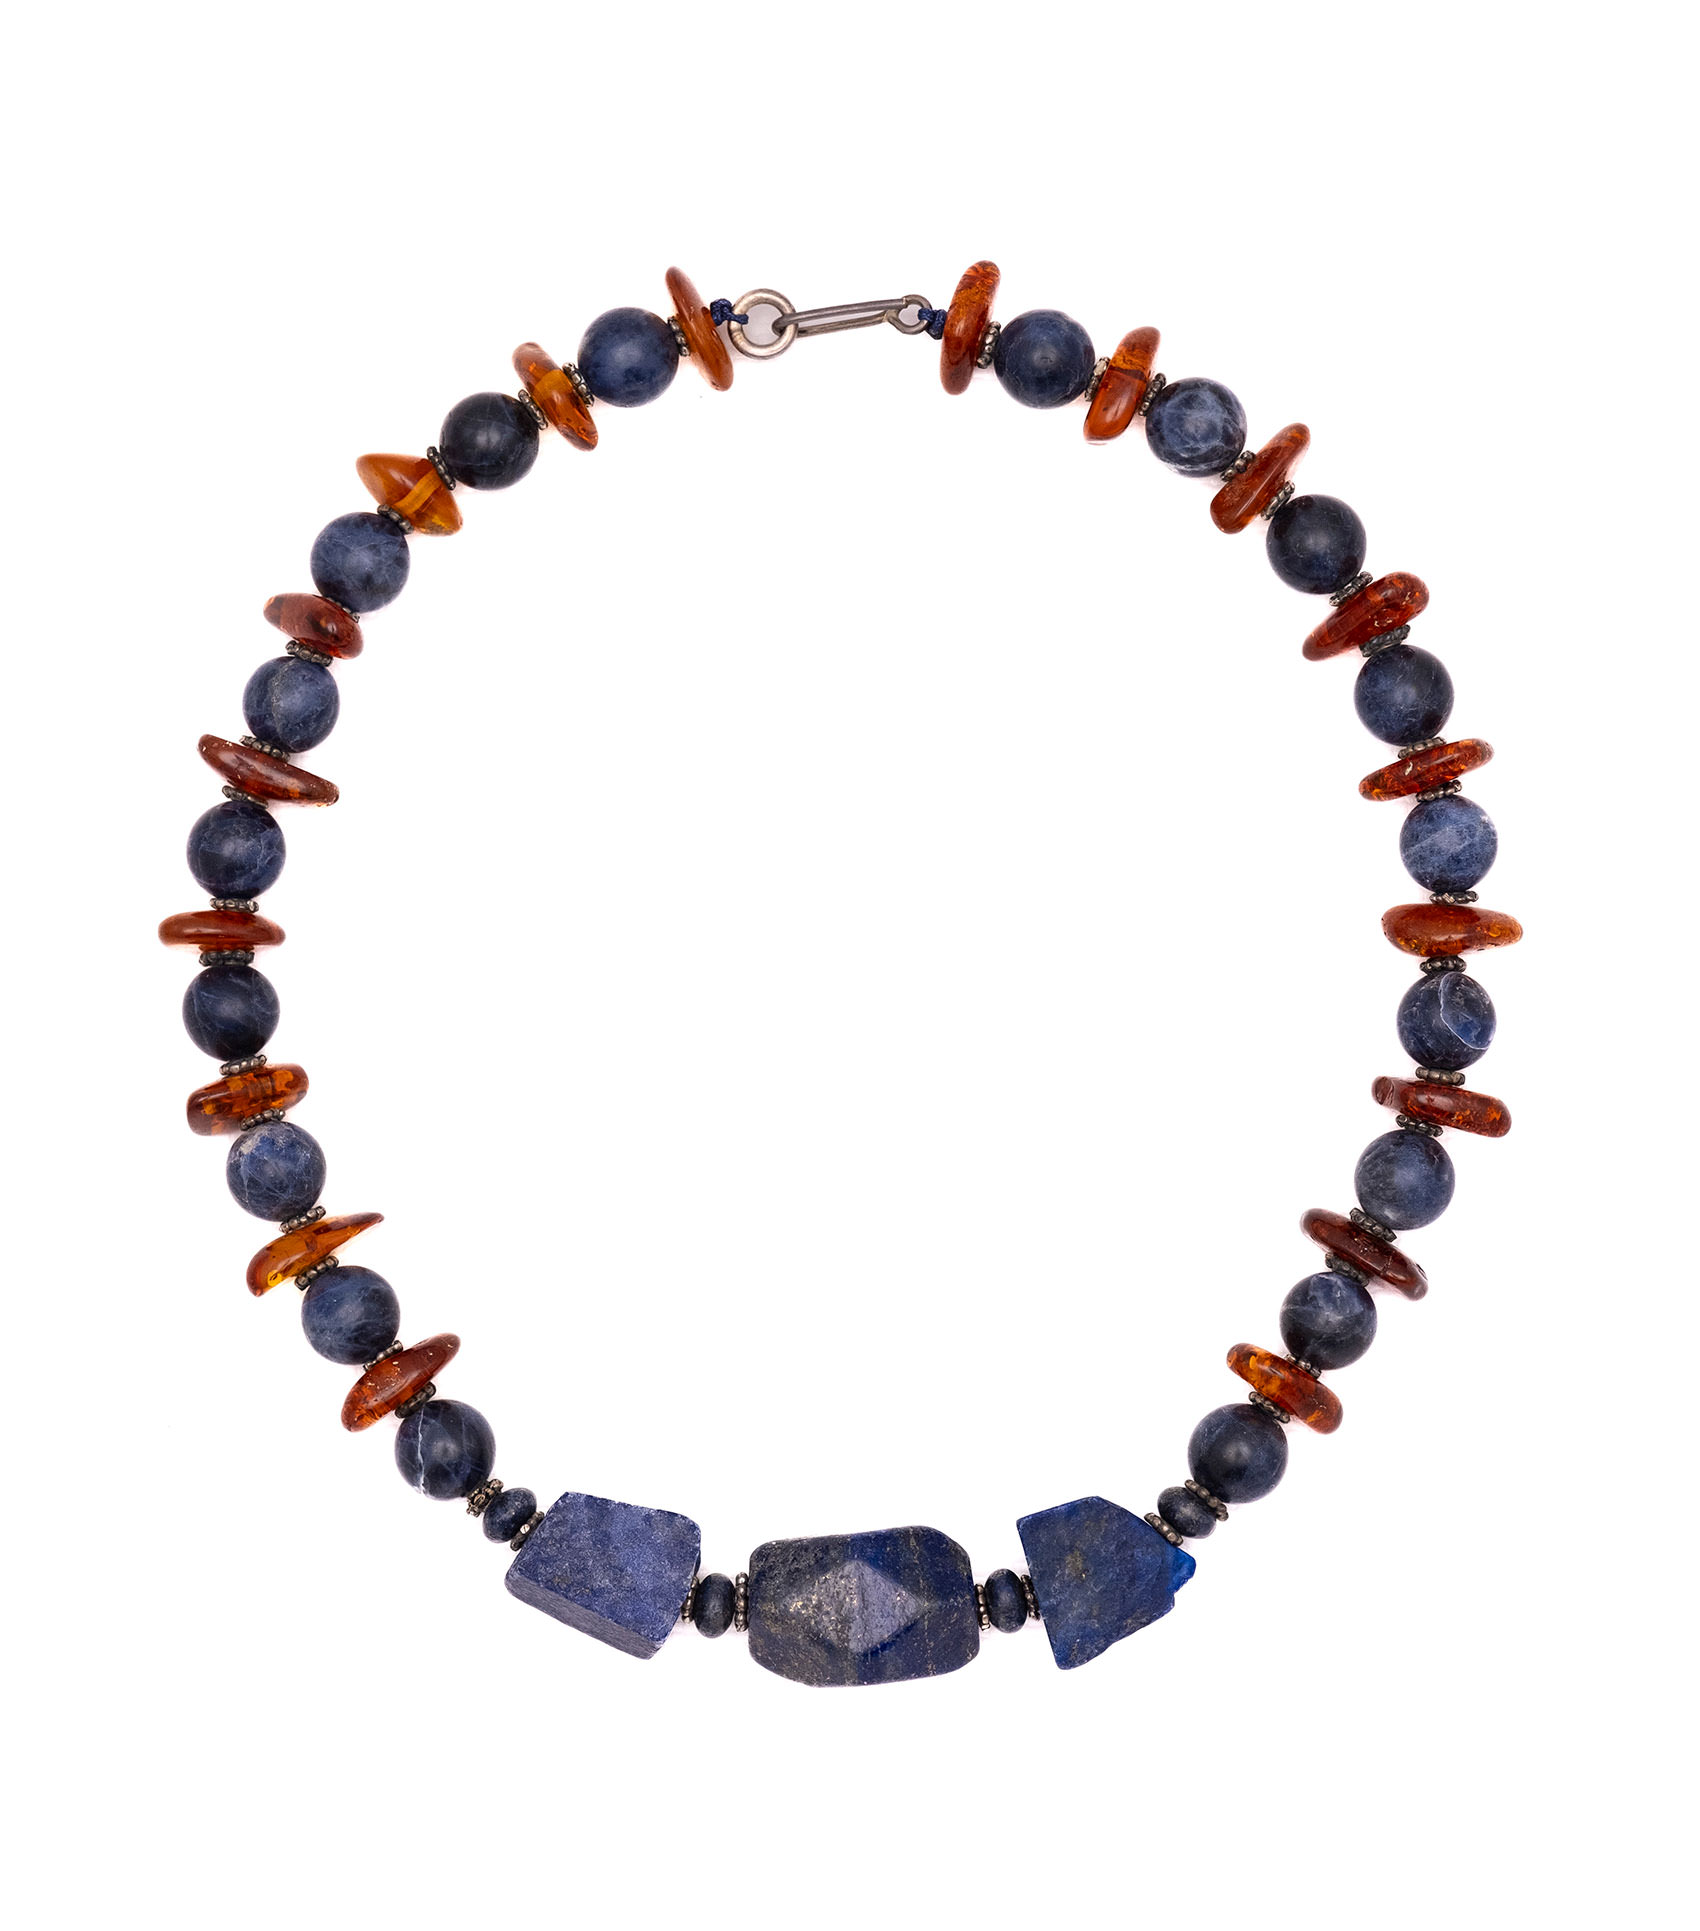 Necklace made of genuine amber from Baltic sea - cut by hand and silver.